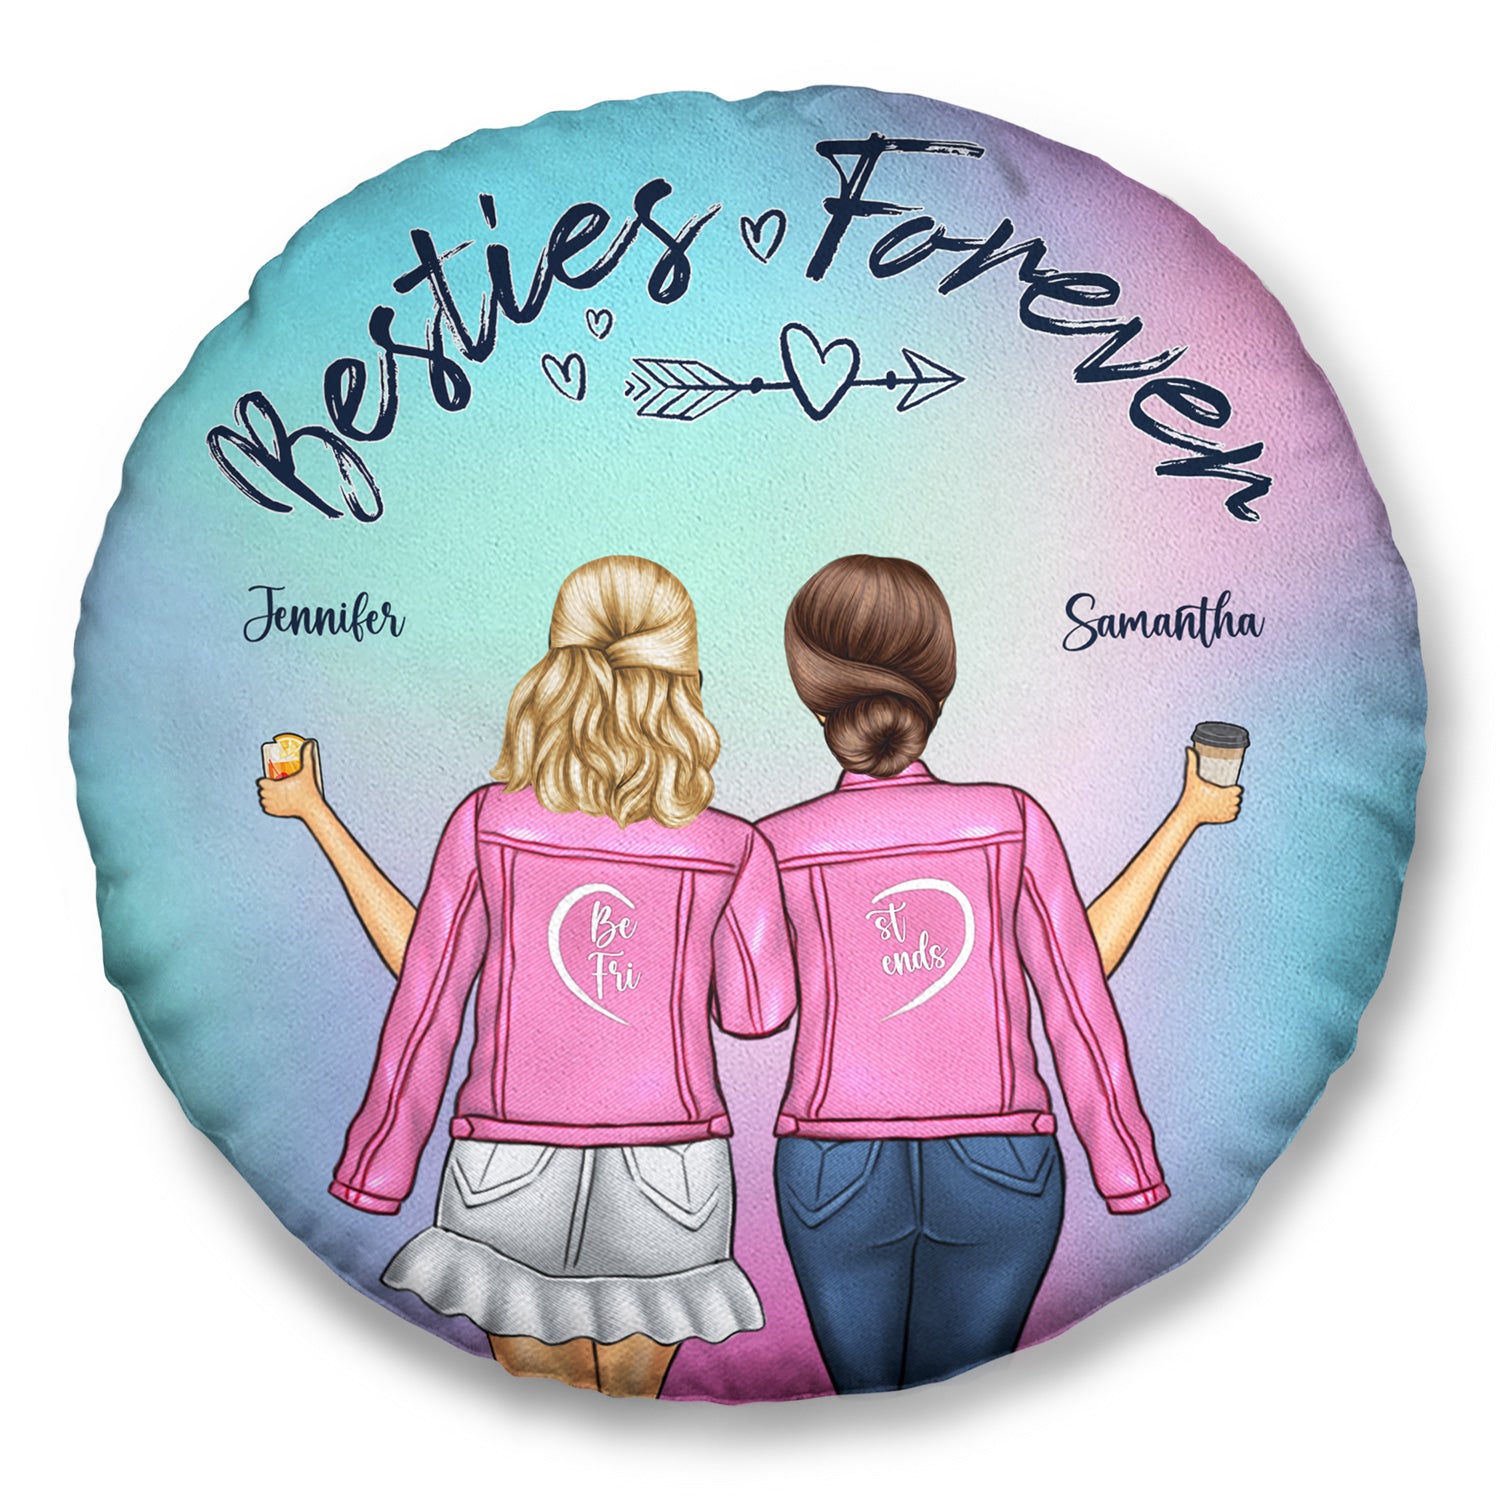 Besties Forever - Gift For Best Friends, Besties - Personalized Custom Round Pillow